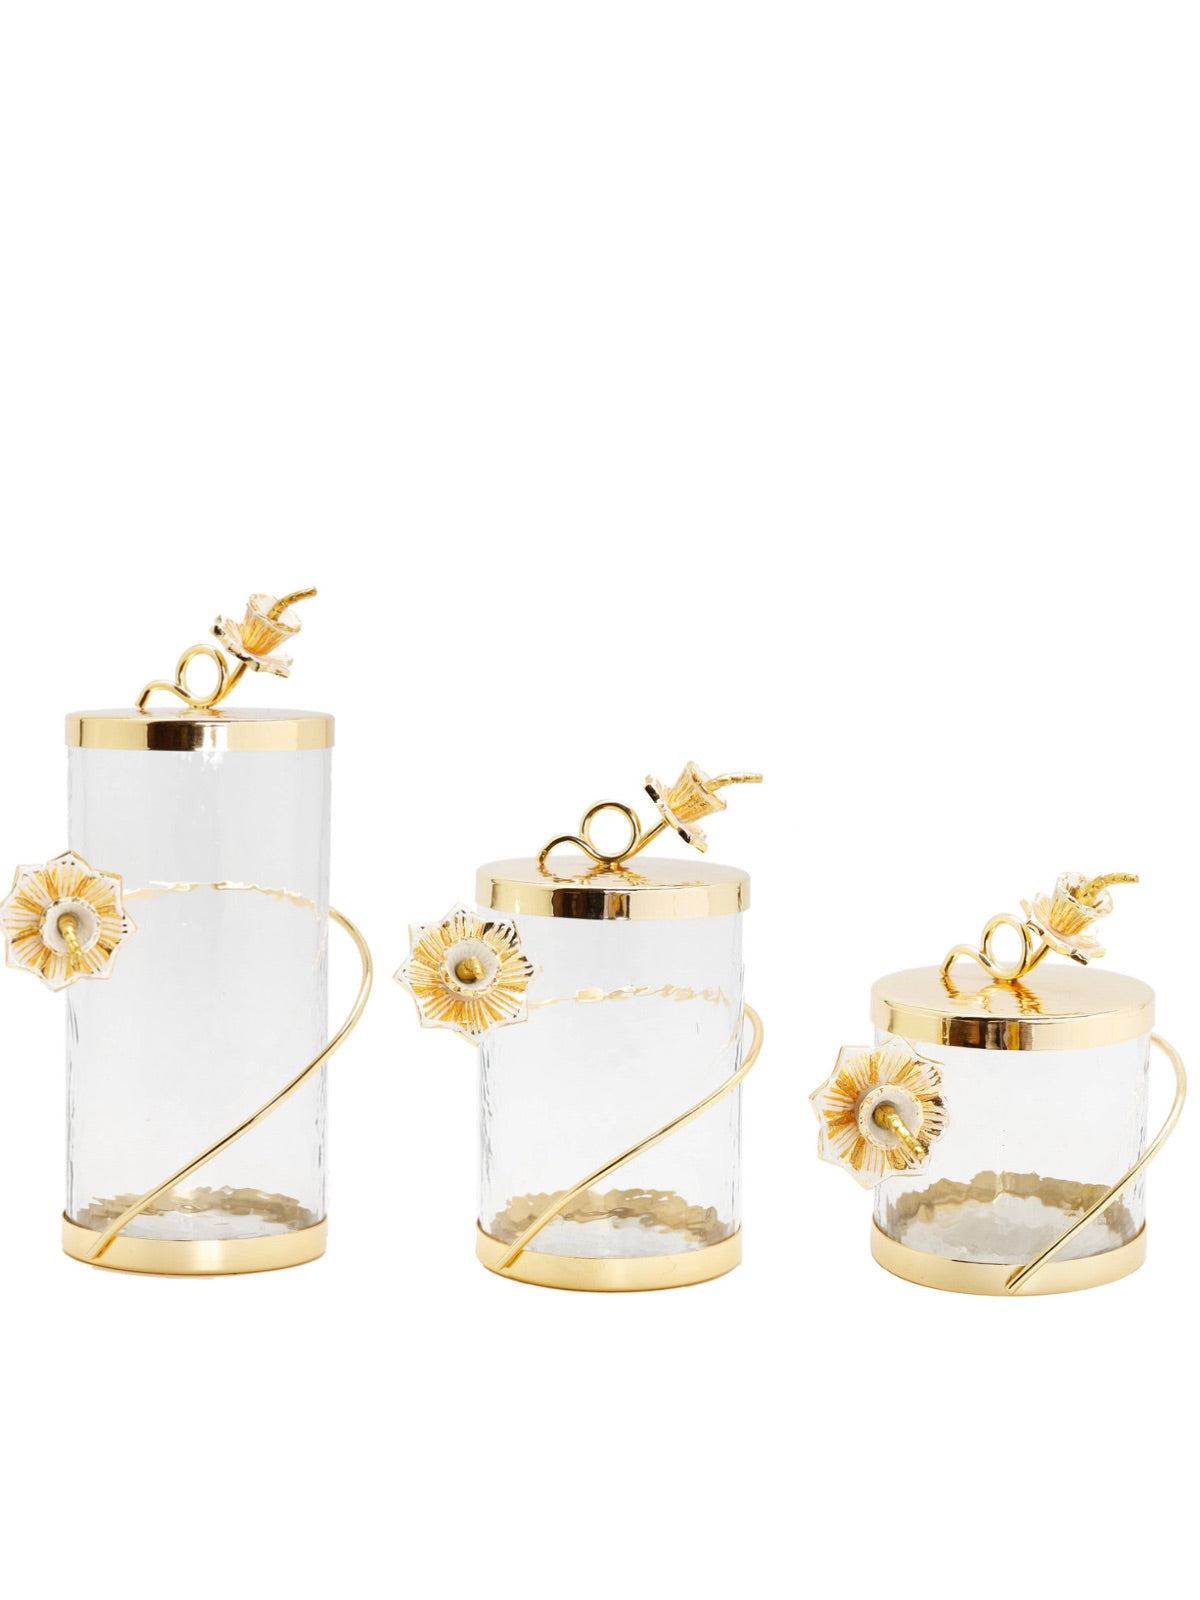 The Rose of Sharon Glass Canister with Gold Lid and  Enamel Flower Design on Knob has an elegant and decorous design.